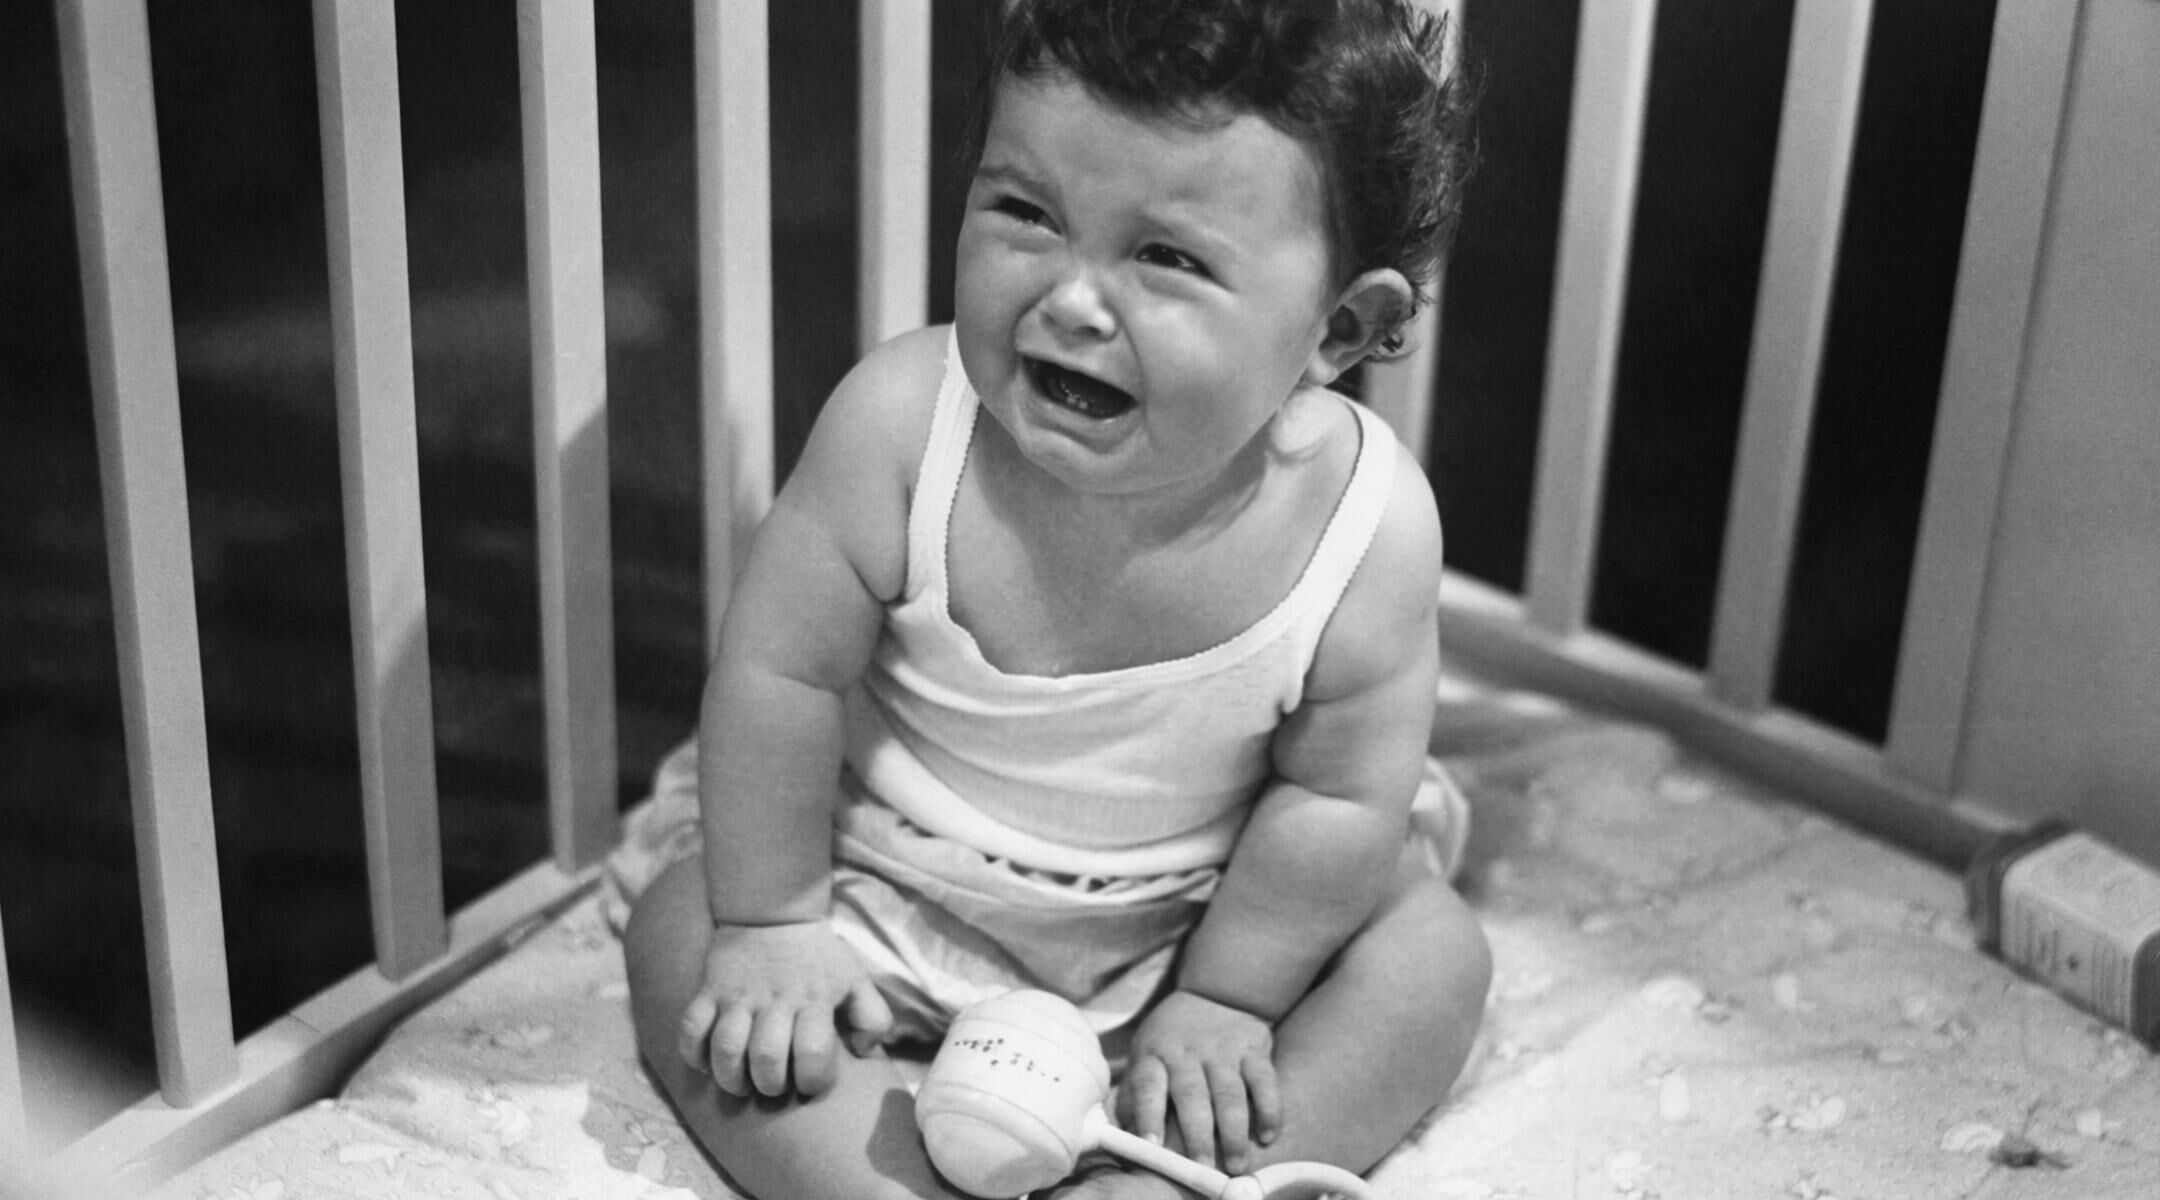 Retro black and white photo of baby crying in playpen. 